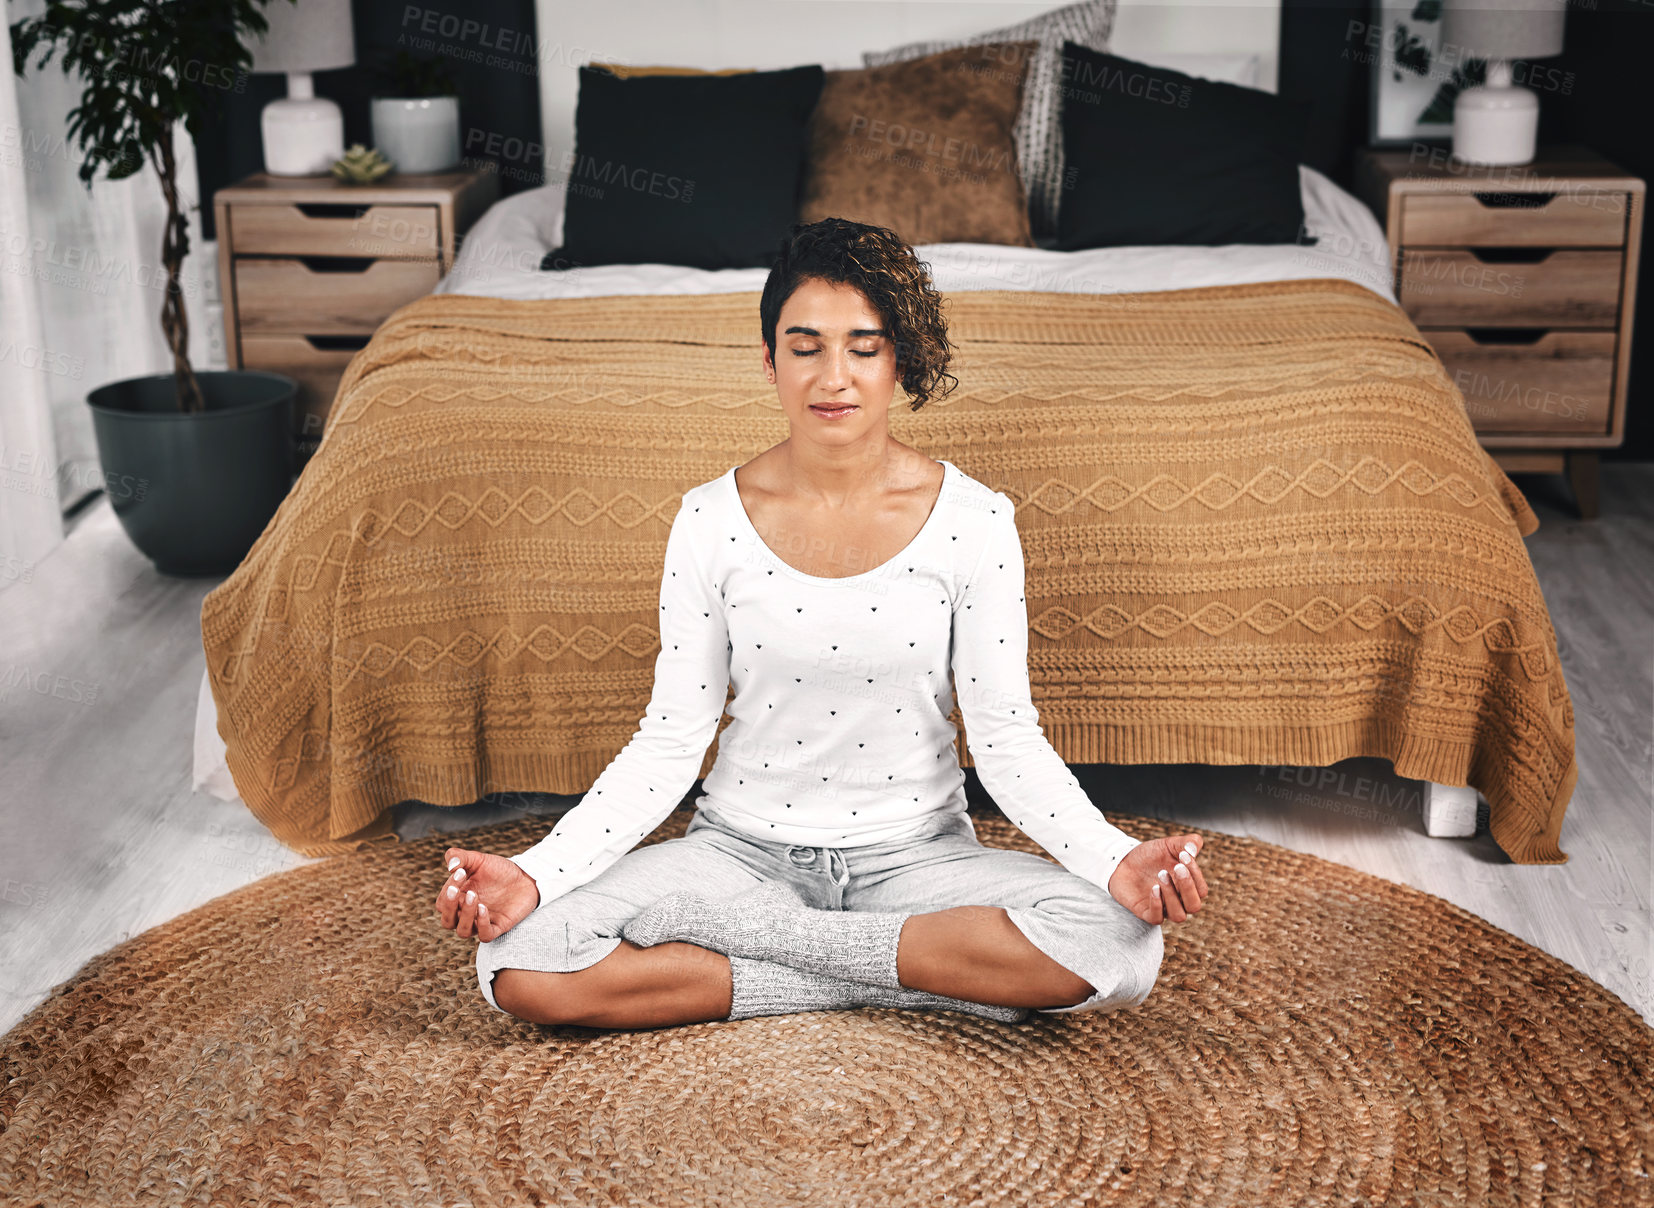 Buy stock photo Cropped shot of an attractive young woman sitting and meditating by the foot of her bed in her bedroom